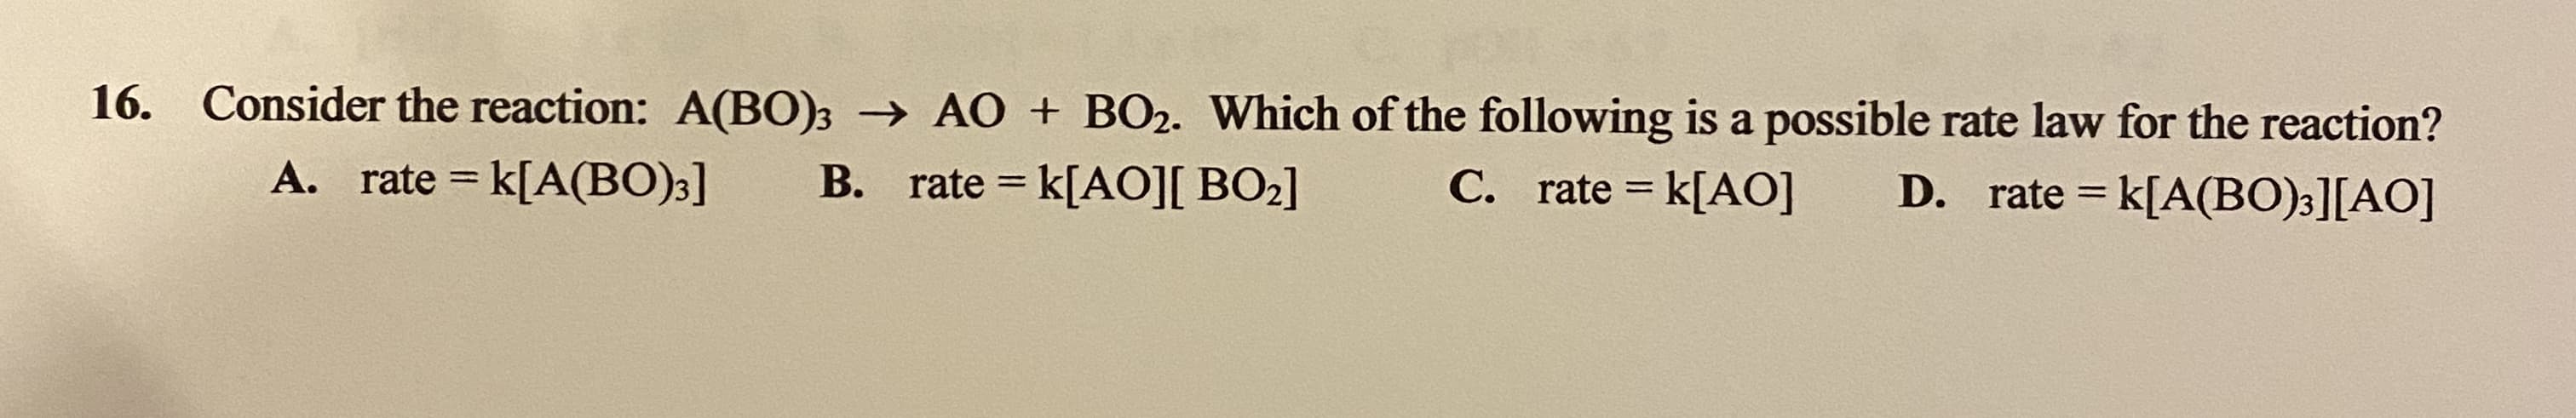 Consider the reaction: A(B0)3 → AO + BO2. Which of the following is a possible rate law for the reaction?
A. rate = k[A(BO);]
B. rate = k[AO][ BO2]
C. rate = k[AO]
D. rate = k[A(BO)3][AO]
%3D
